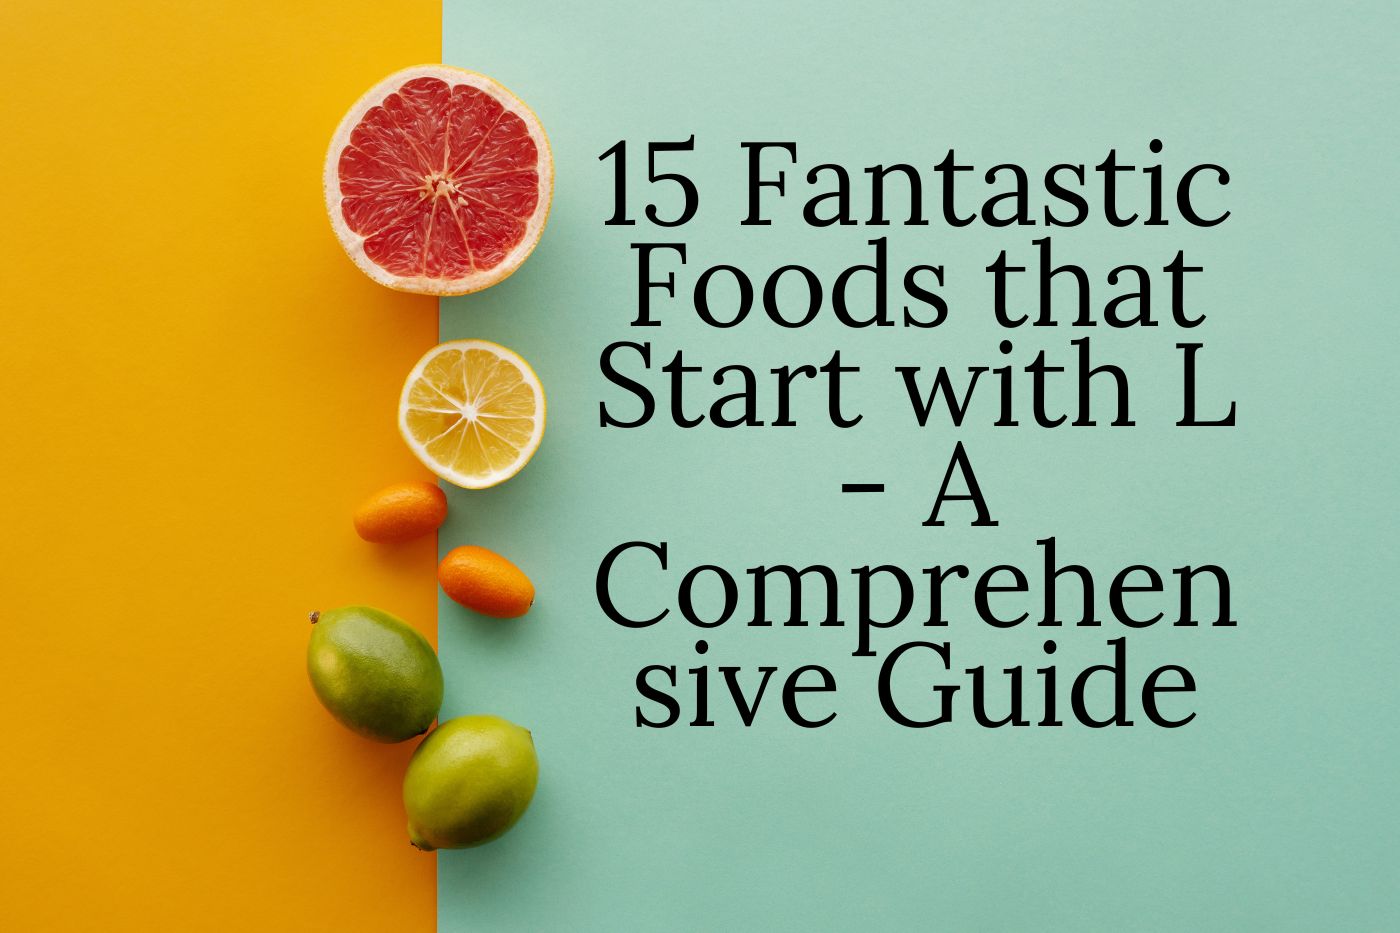 15 Fantastic Foods that Start with L - A Comprehensive Guide